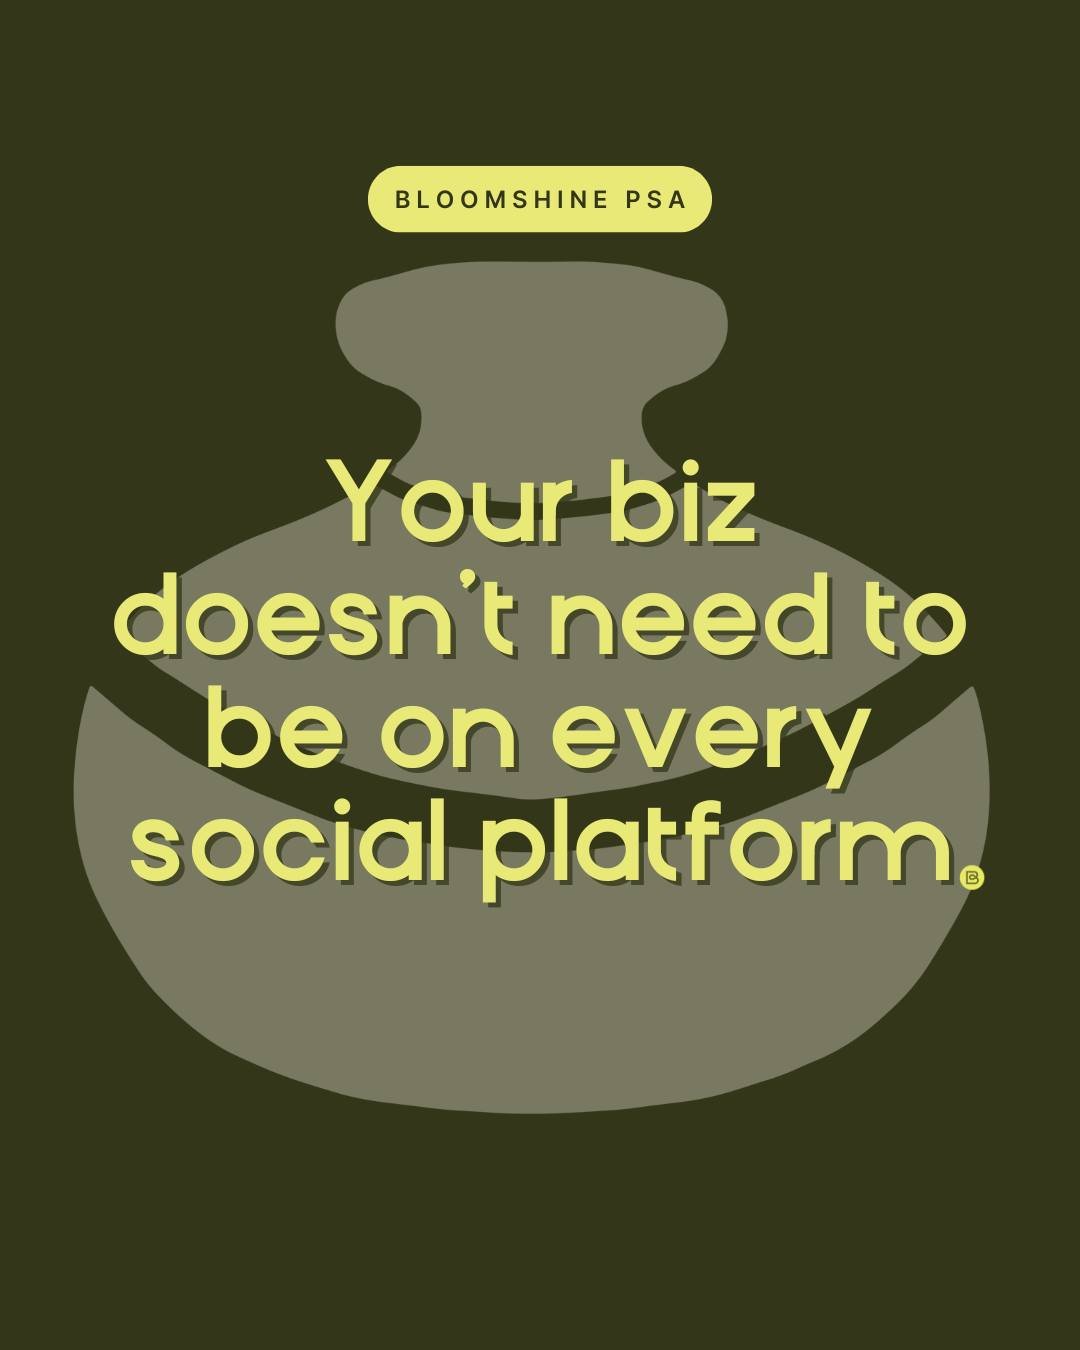 📢Don't stress over every social platform!

Feeling the pressure to be everywhere at once? You're not alone! But guess what? Your business doesn't need to be on every platform to THRIVE.

Find your audience where they are, not where you think you sho